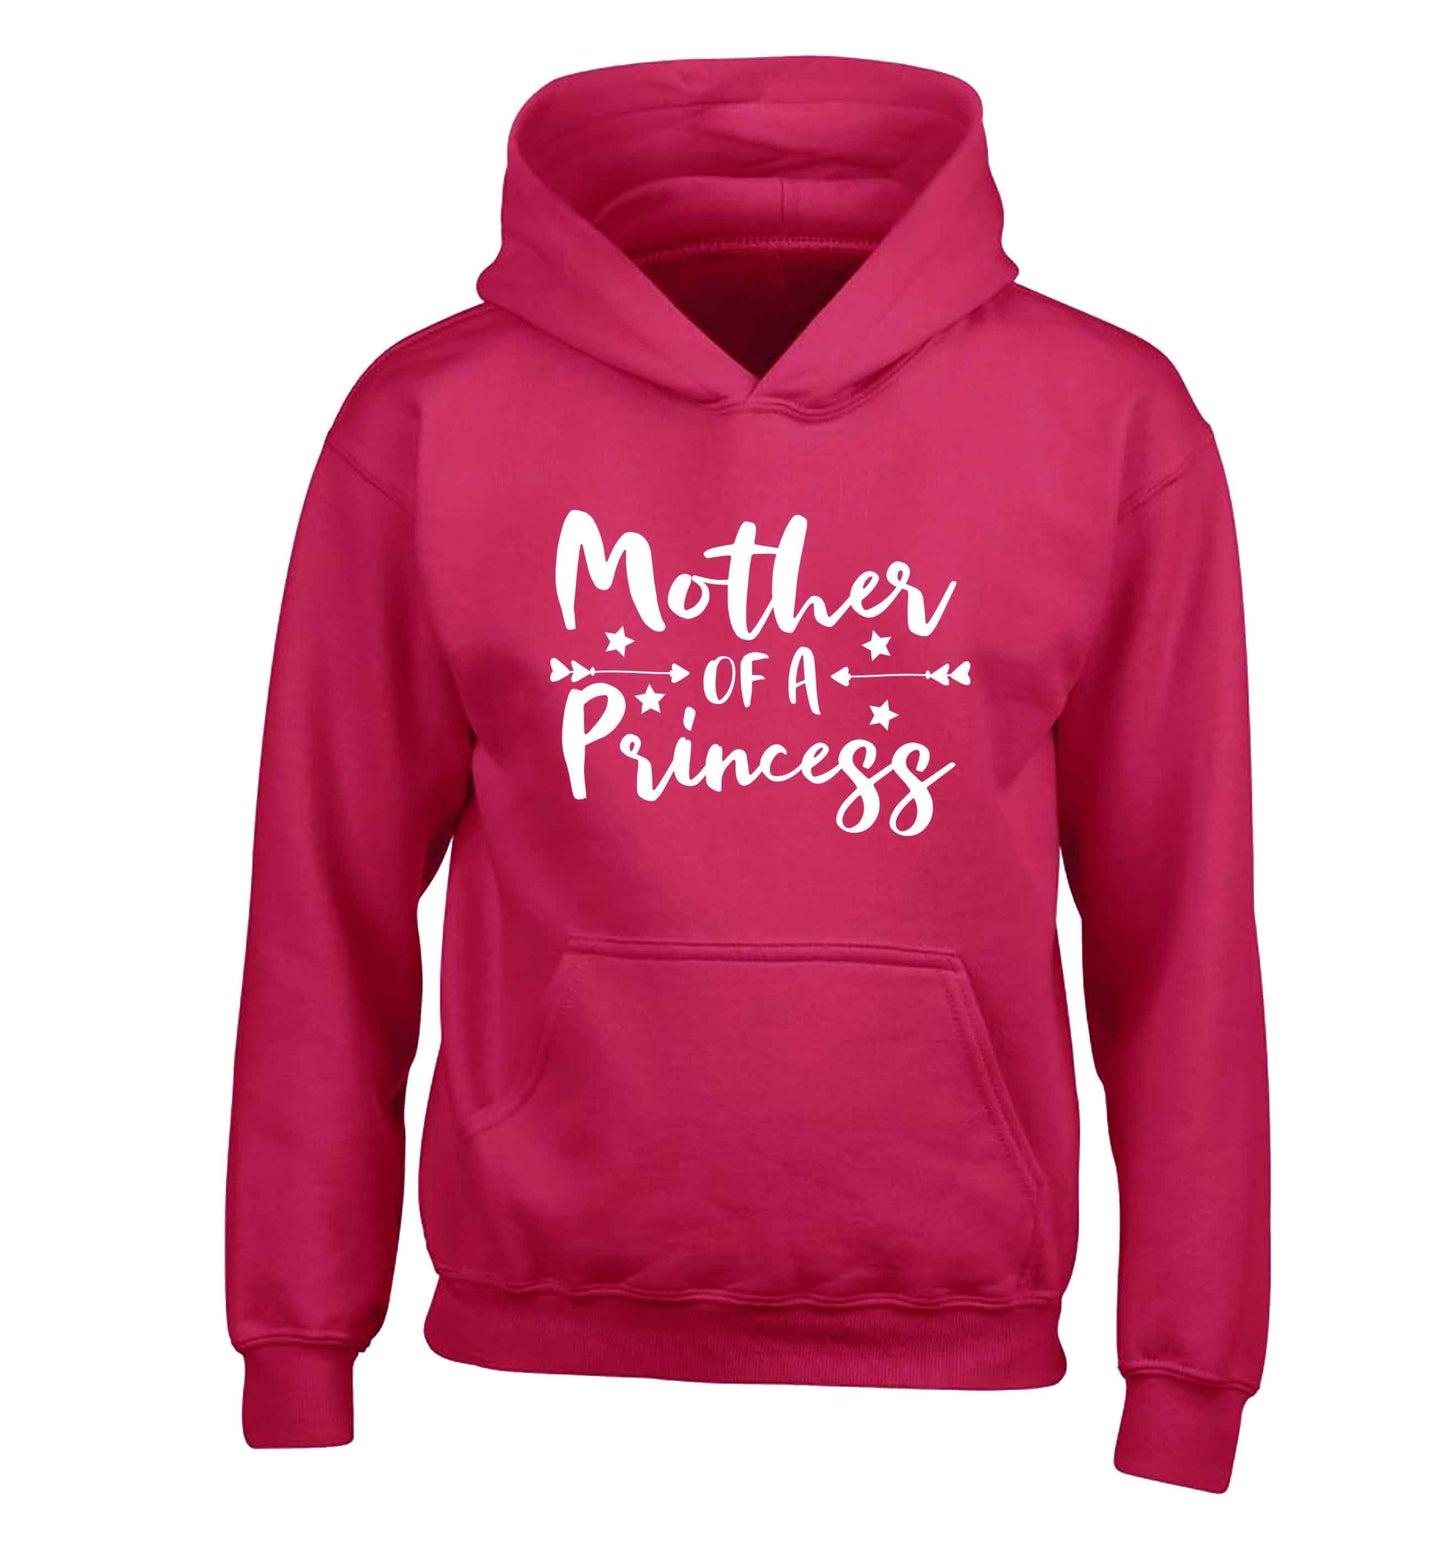 Mother of a princess children's pink hoodie 12-13 Years